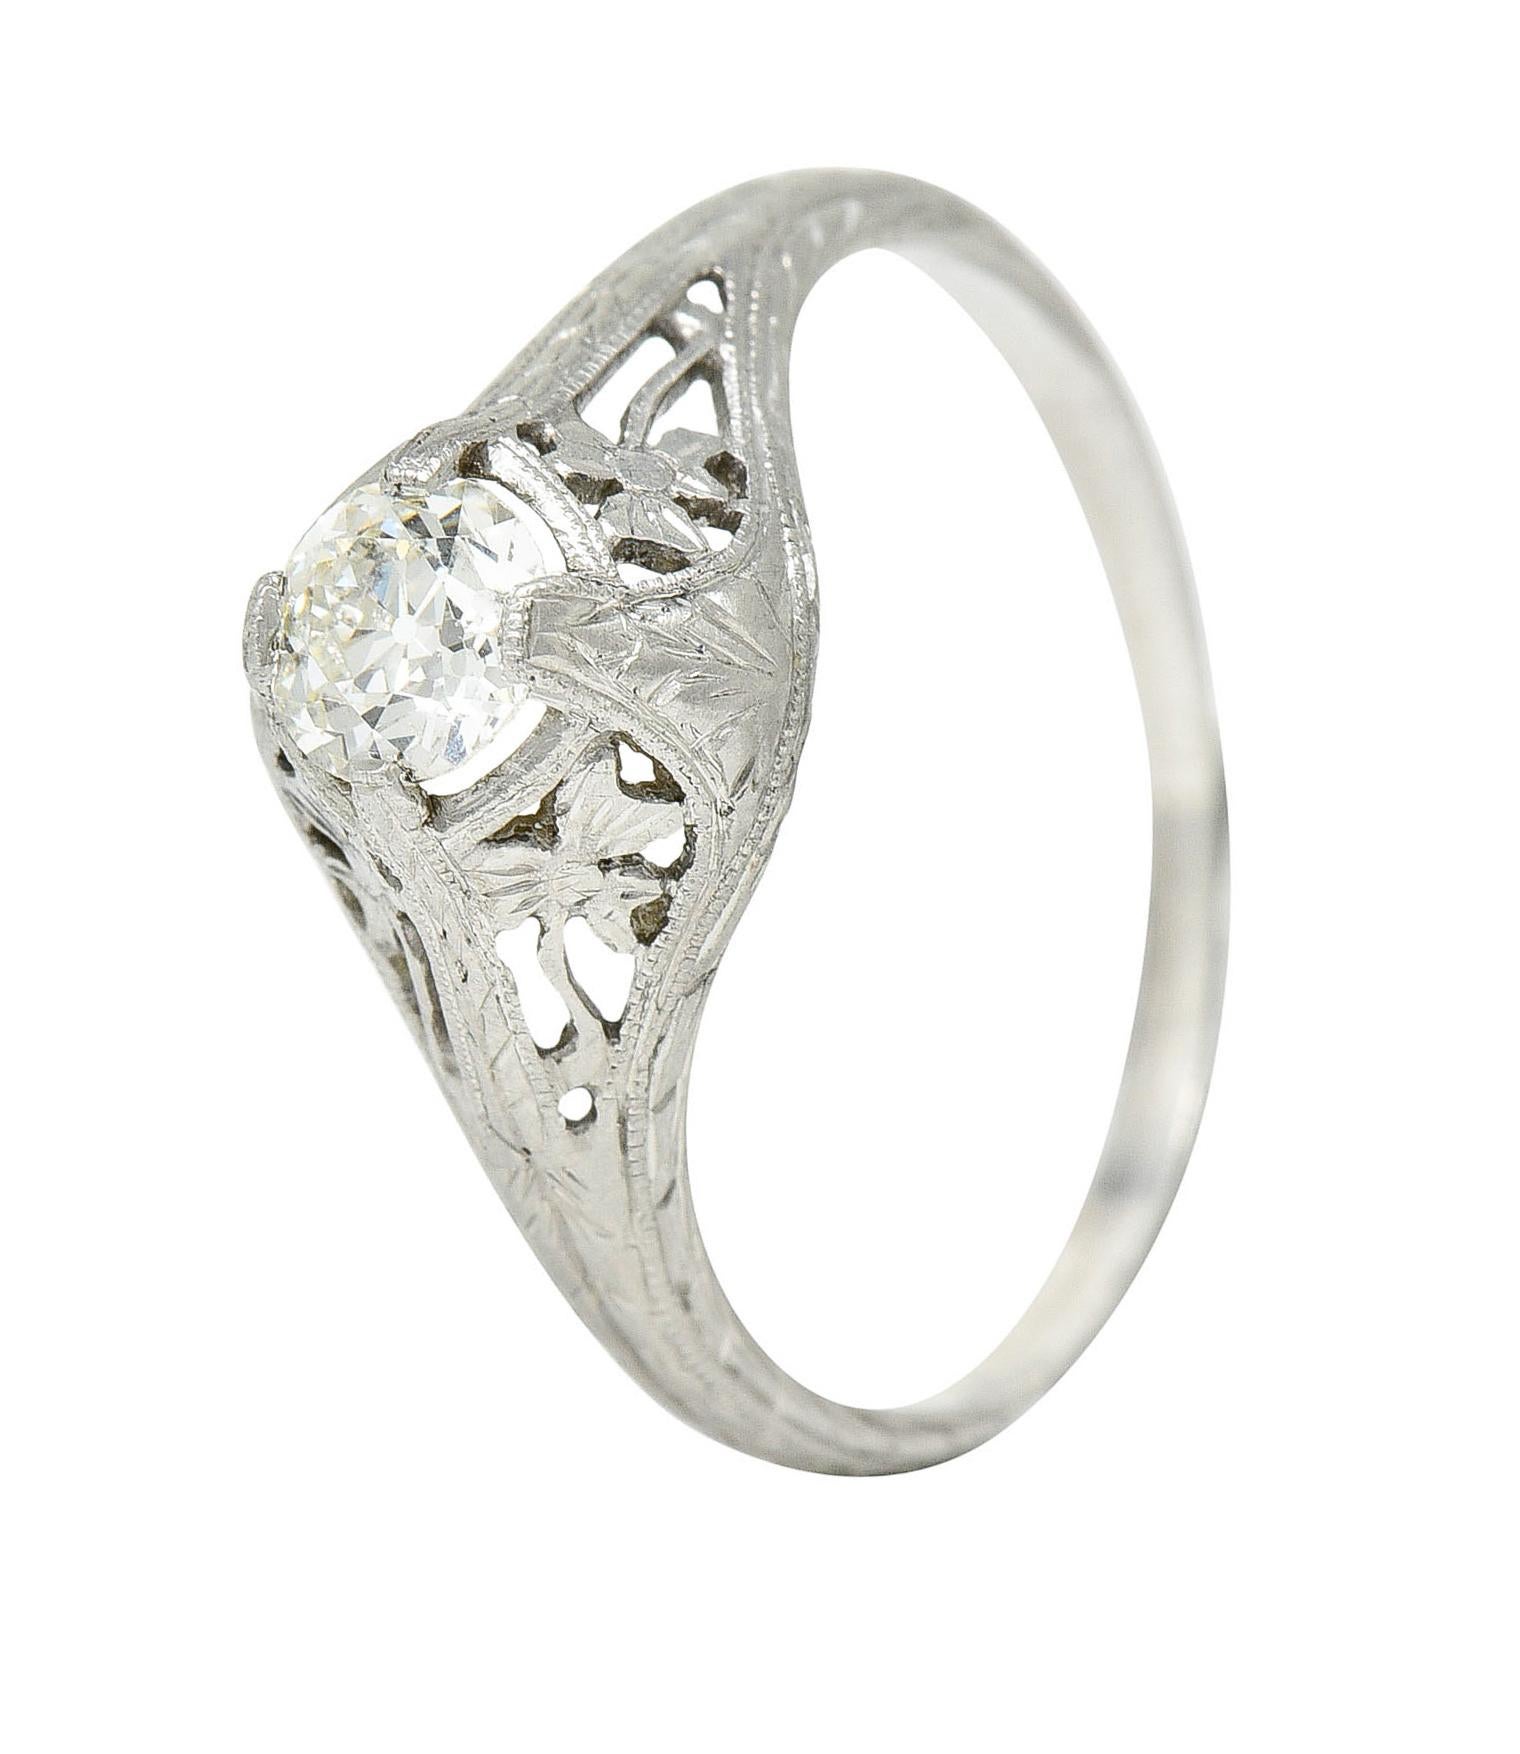 1920's Early Art Deco 0.43 Carat Diamond Platinum Clover Engagement Ring For Sale 3